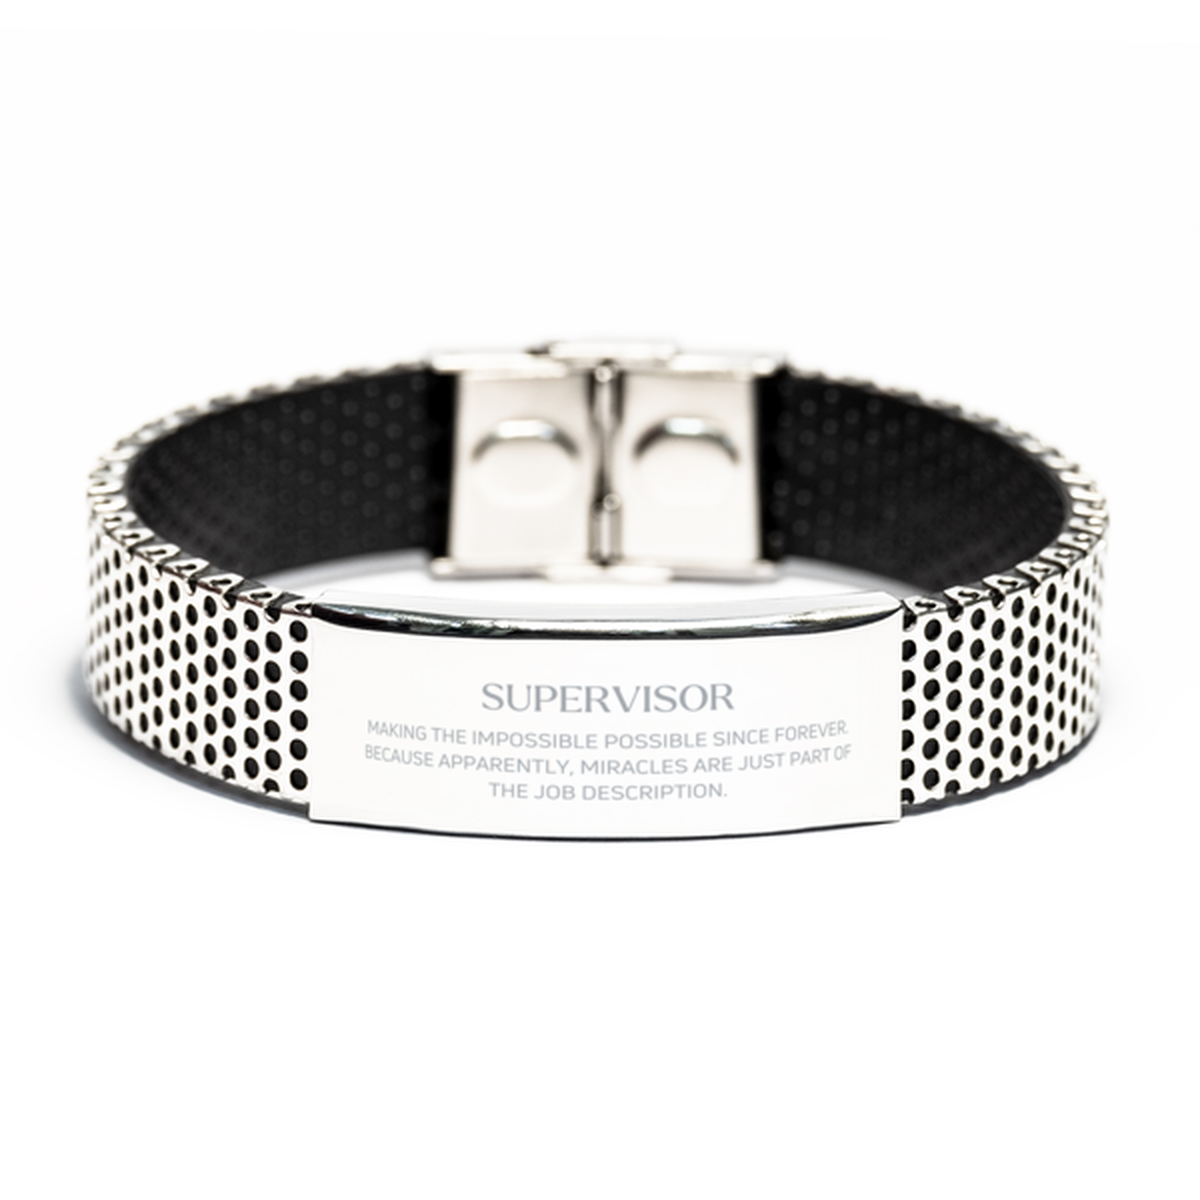 Funny Supervisor Gifts, Miracles are just part of the job description, Inspirational Birthday Stainless Steel Bracelet For Supervisor, Men, Women, Coworkers, Friends, Boss